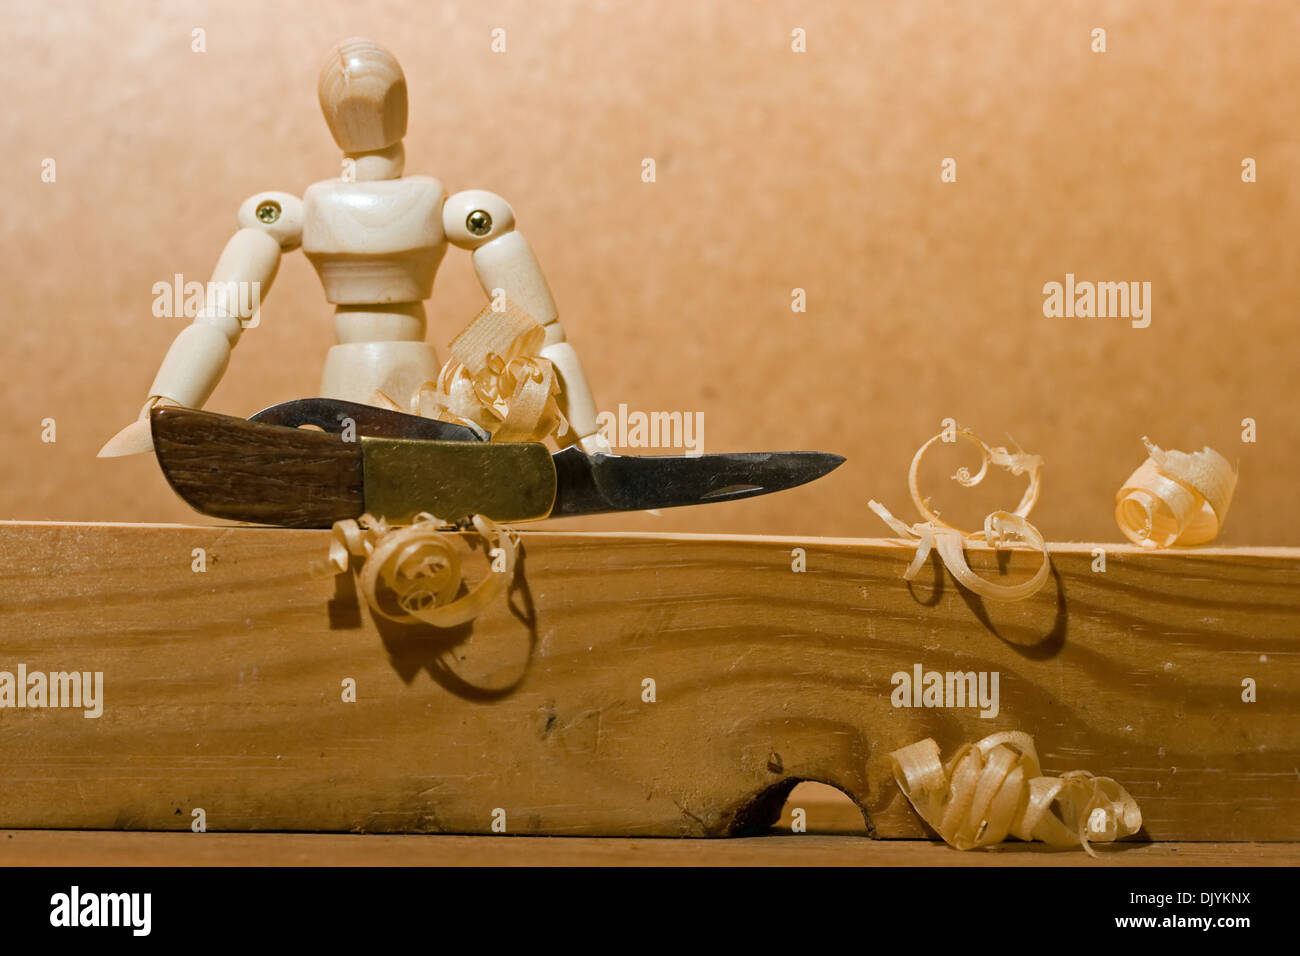 Manikin with penknife and wood shavings. Stock Photo